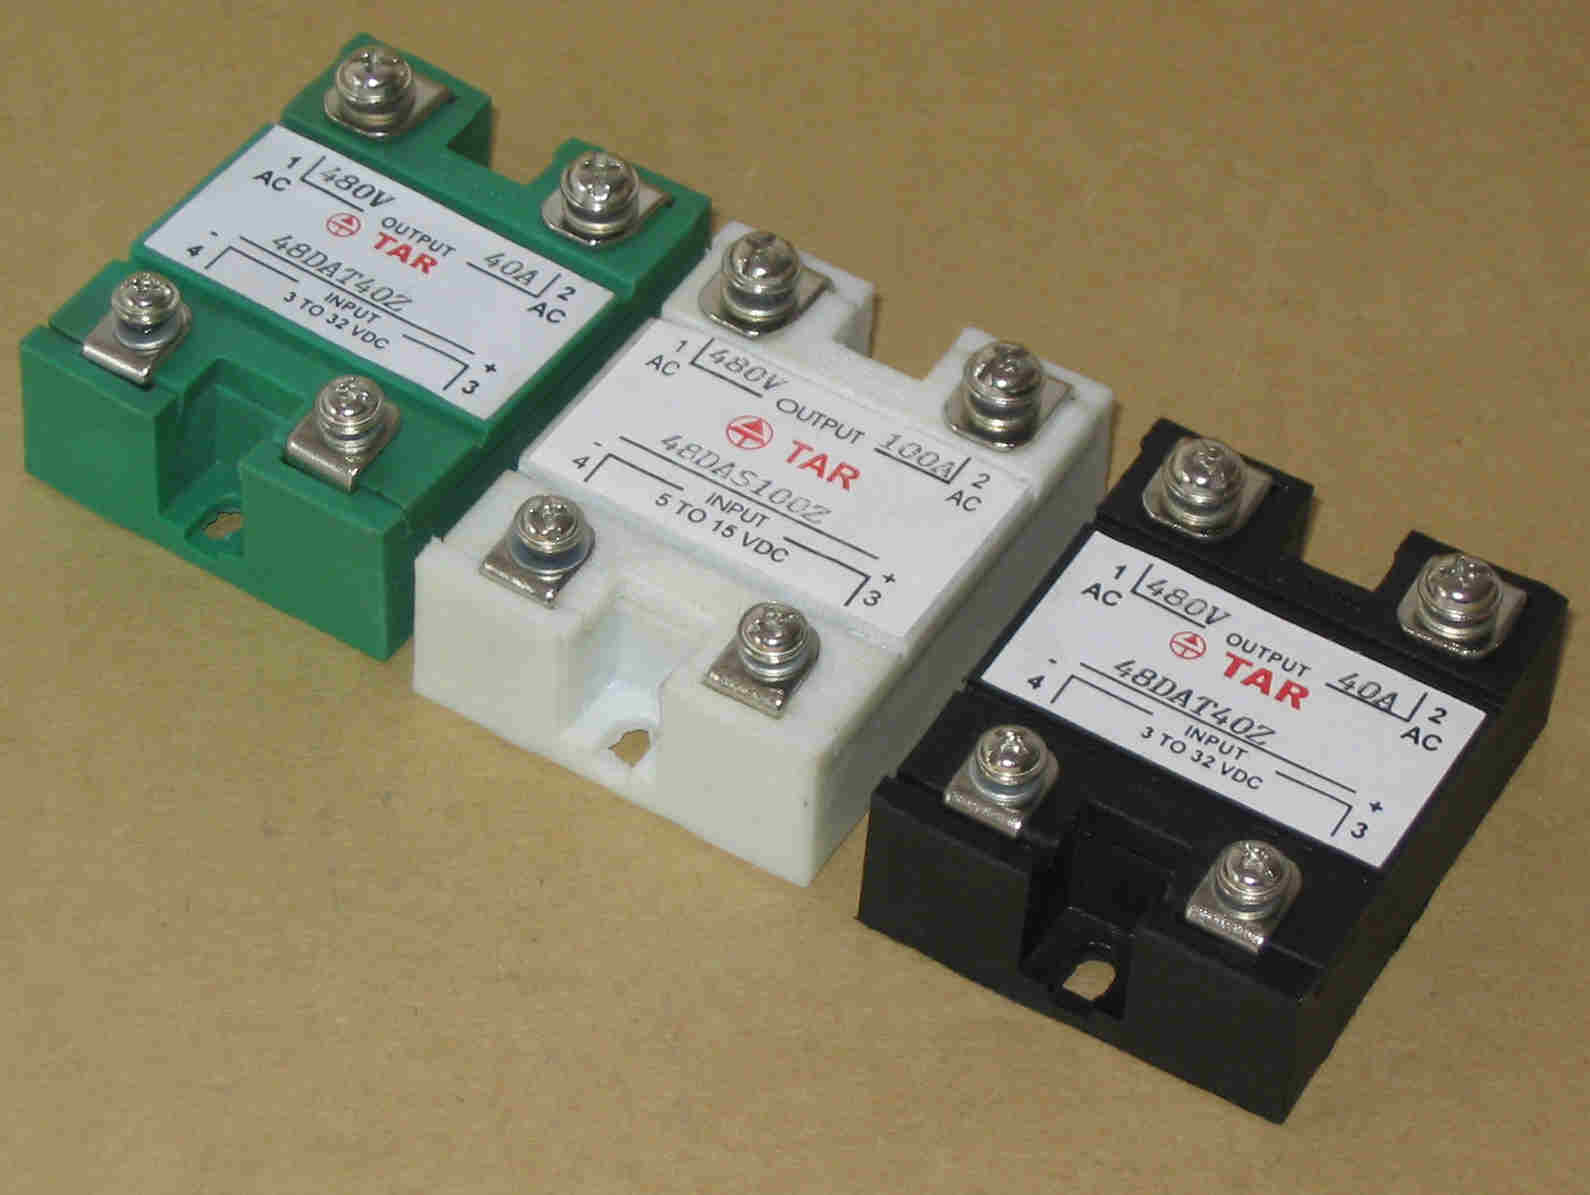  TAR Solid State Relay (TRE Solid State Relay)